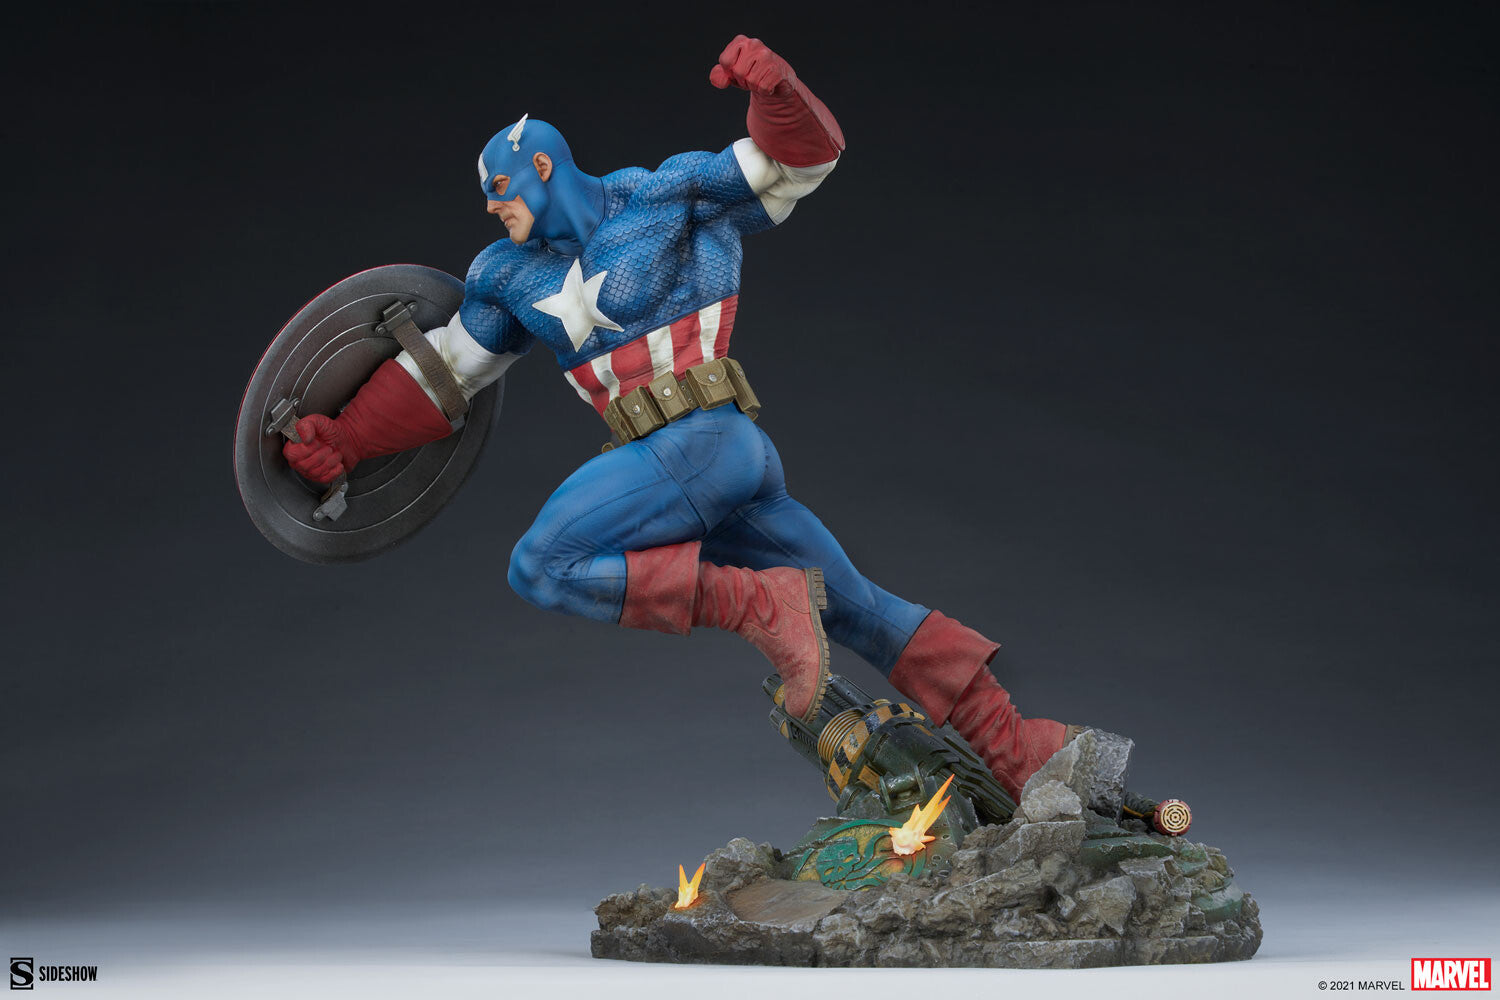 Sideshow Collectibles | What makes them true kings of premium collectibles?